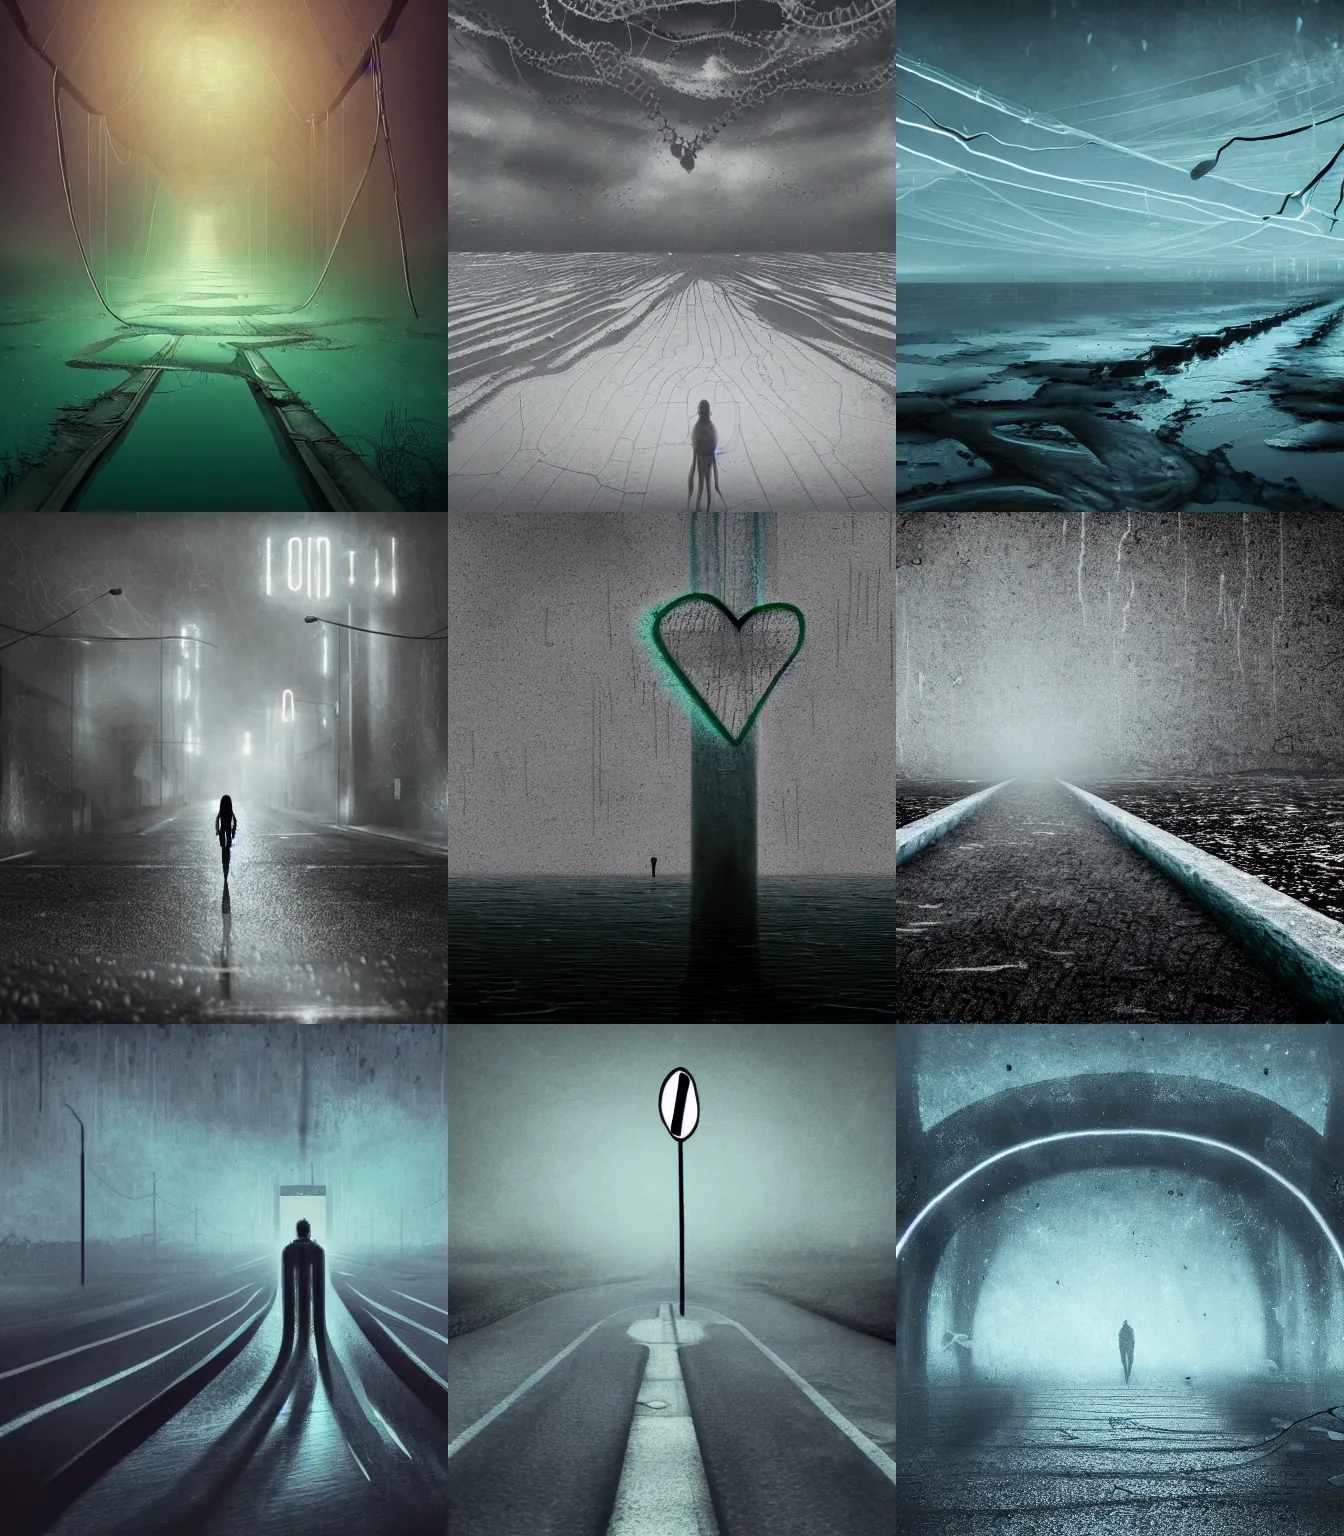 Prompt: the long and empty lonely road to nowhere | A vain attempt to escape the inky depths of the abyss of darkness, drowning in tentacles, losing air | A concrete heart marked with neon love is suspended over stilled waters in an abysmal dark void, realistic, artstation, moody, algae in the gloom, shattered hope sinking